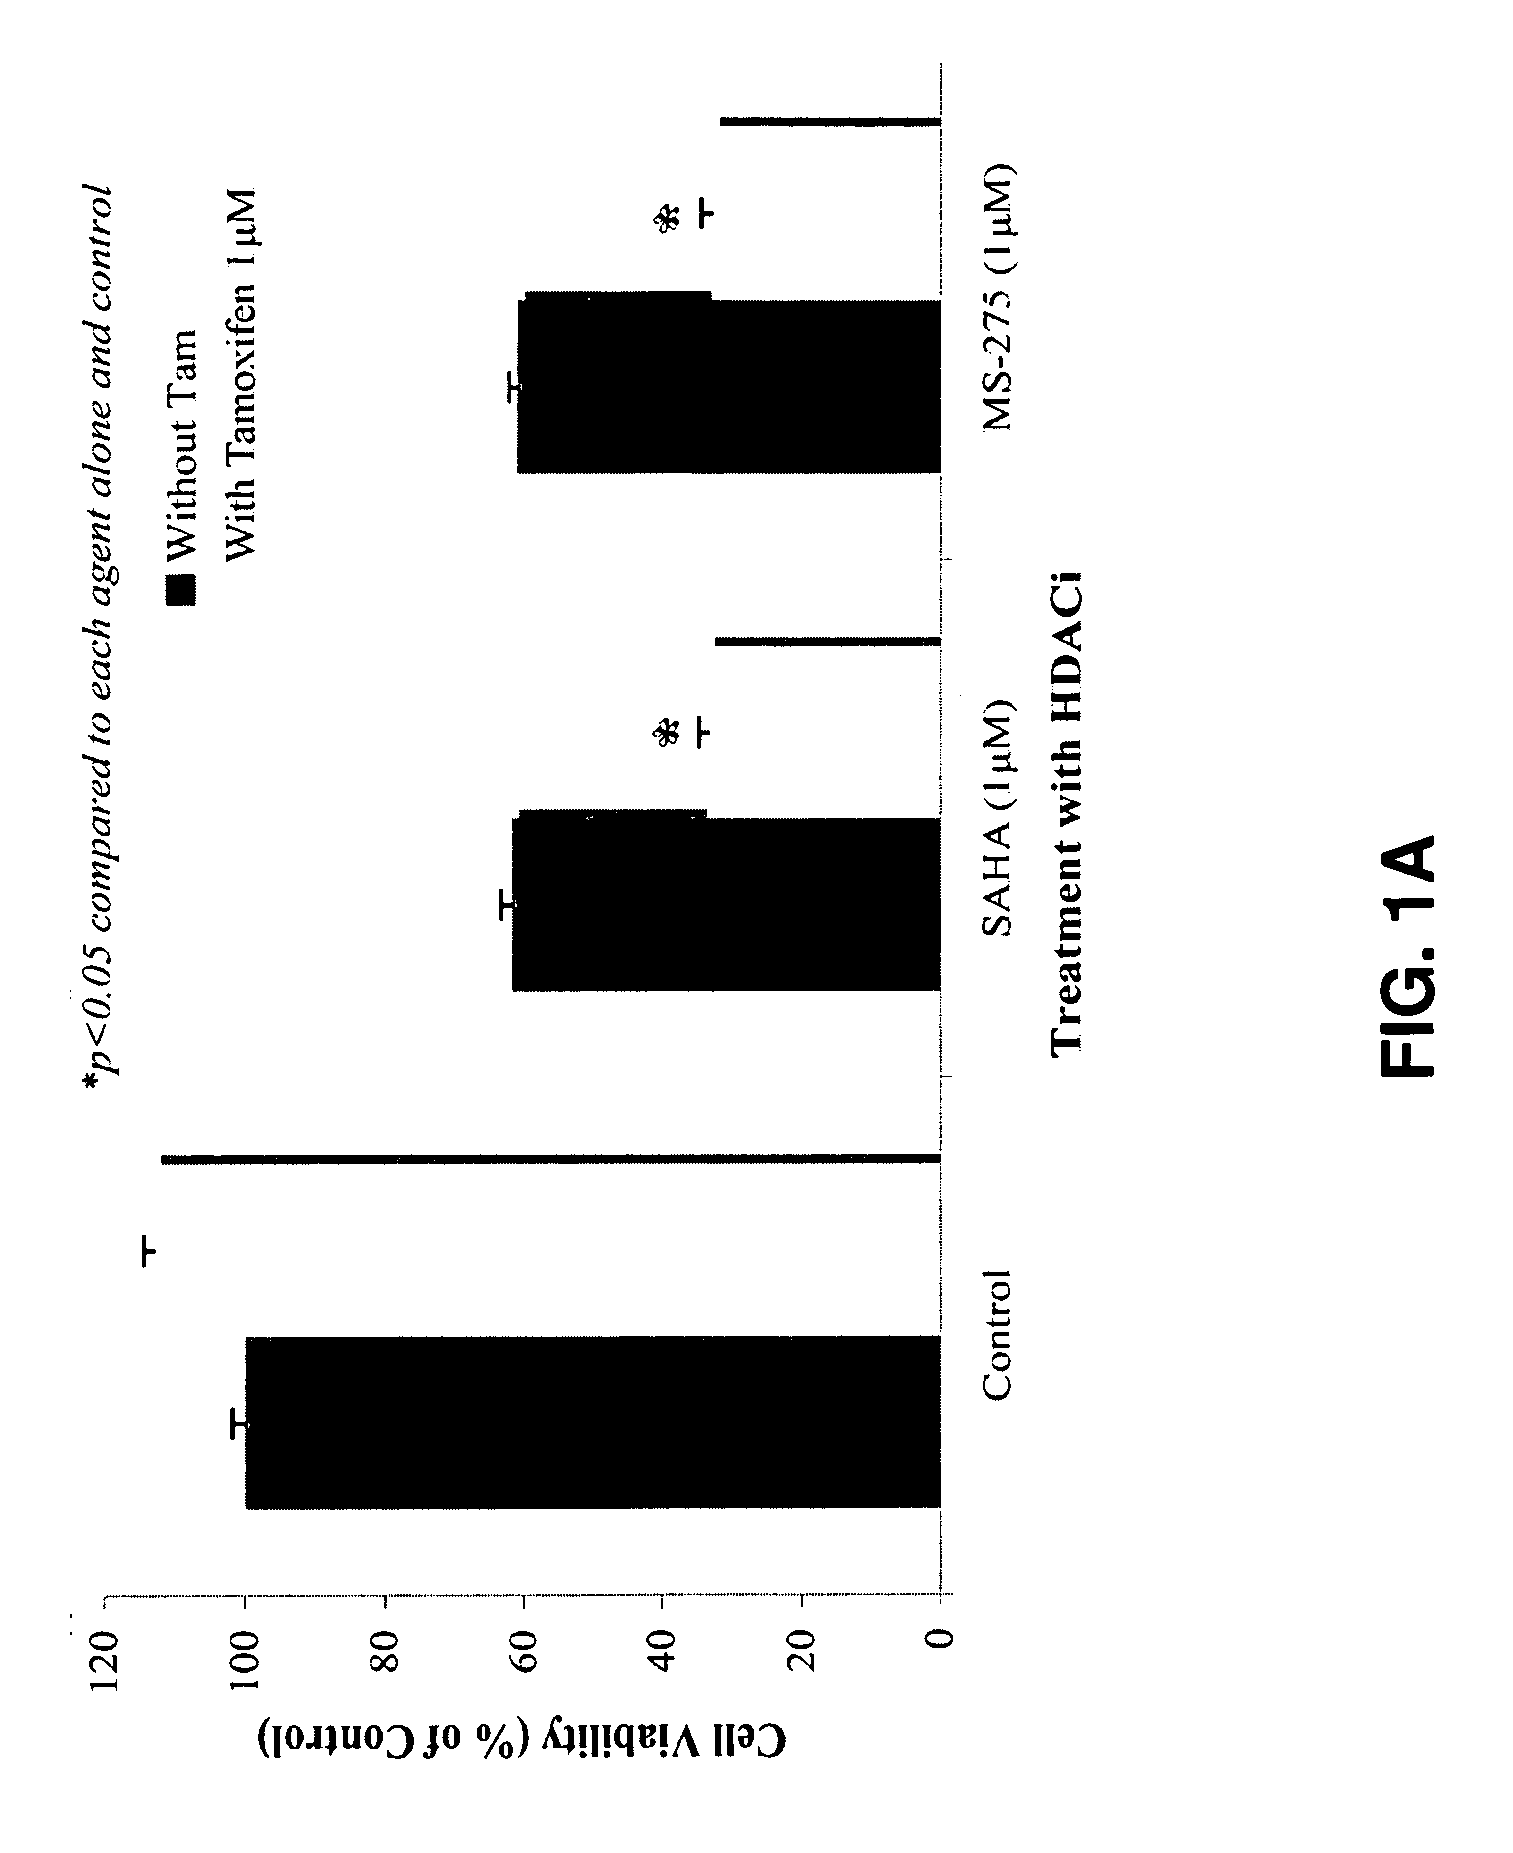 HDAC inhibitors and hormone targeted drugs for the treatment of cancer